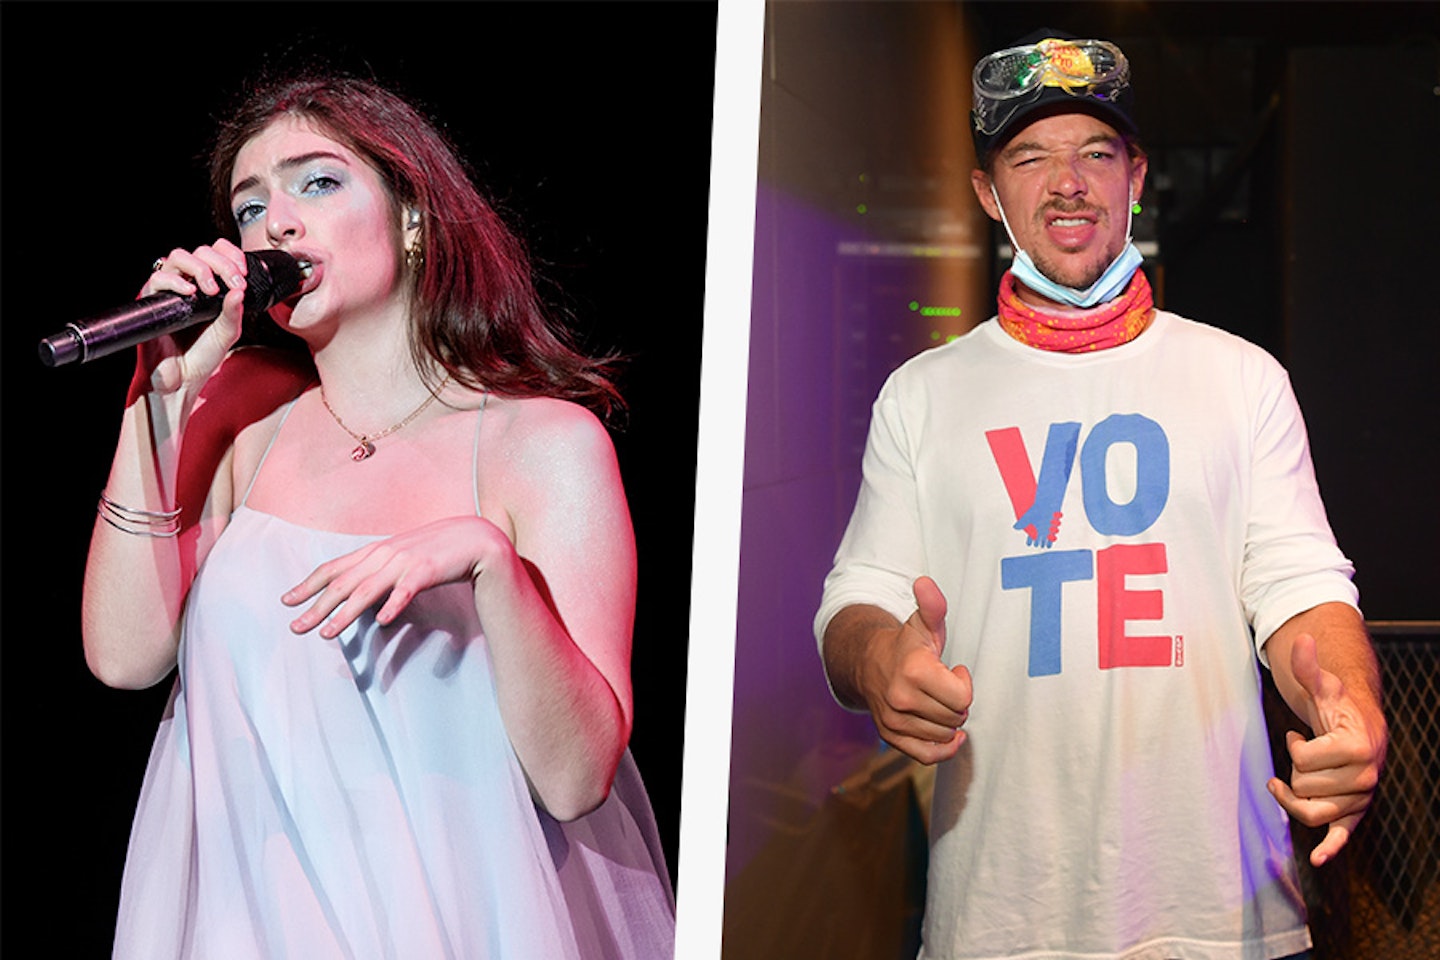  Left- Lorde performs in concert during day 4 of the Primavera Sound Festival on June 2018, Spain. Right- Diplo attends DIPLO + Carnage + Morten 2020 in Atlanta, Georgia.